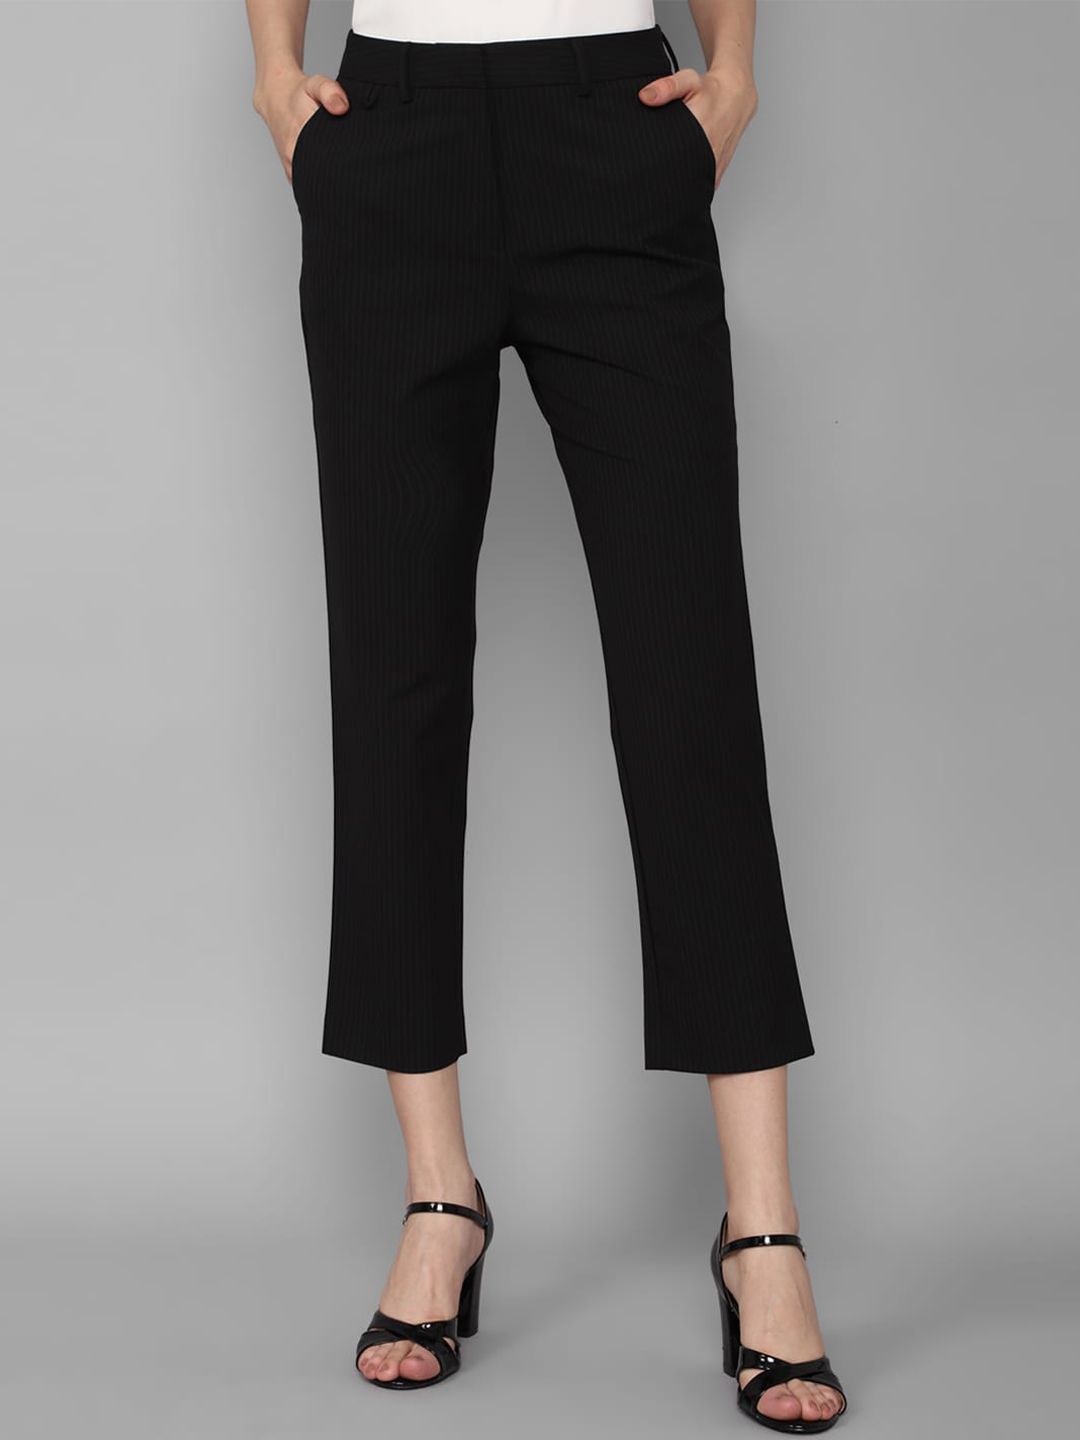 Details 90+ allen solly ladies formal trousers latest - in.duhocakina